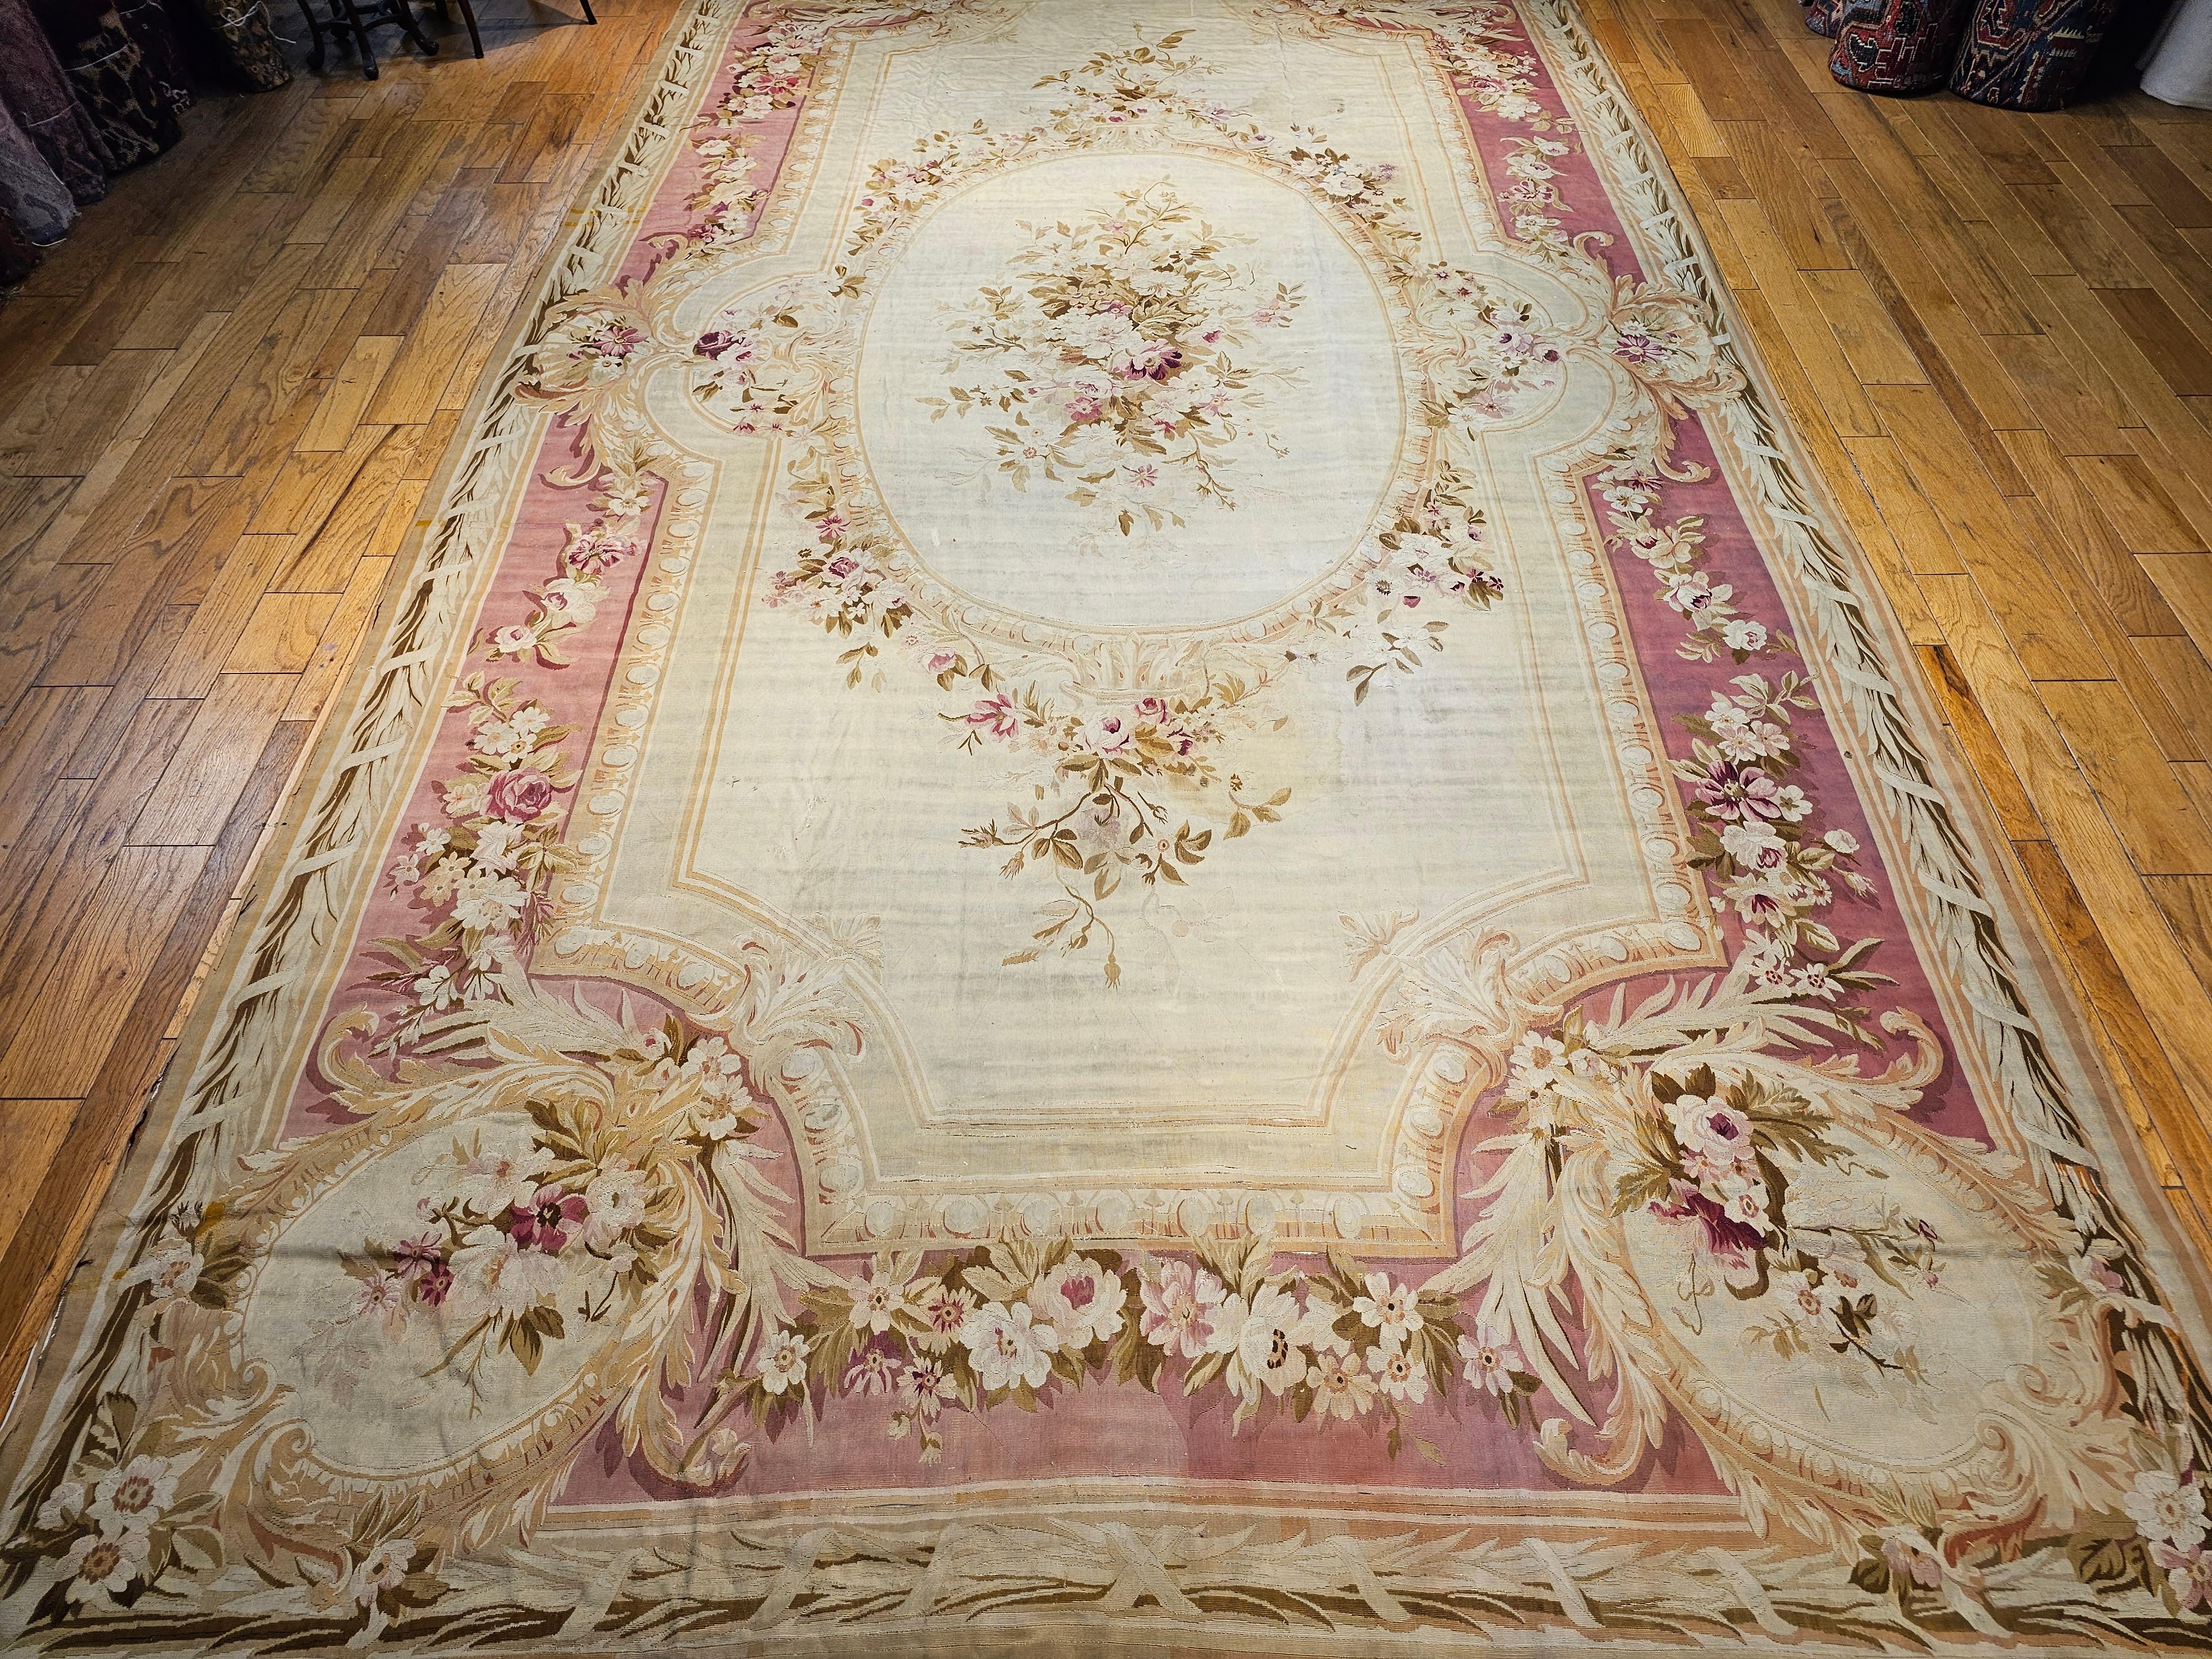  19th century French Aubusson oversized rug in a floral pattern in ivory, red, pink.   A central oval floral medallion flanked by sprays on the ivory field is within a pink color border with floral design throughout.  The Aubusson carpet has a